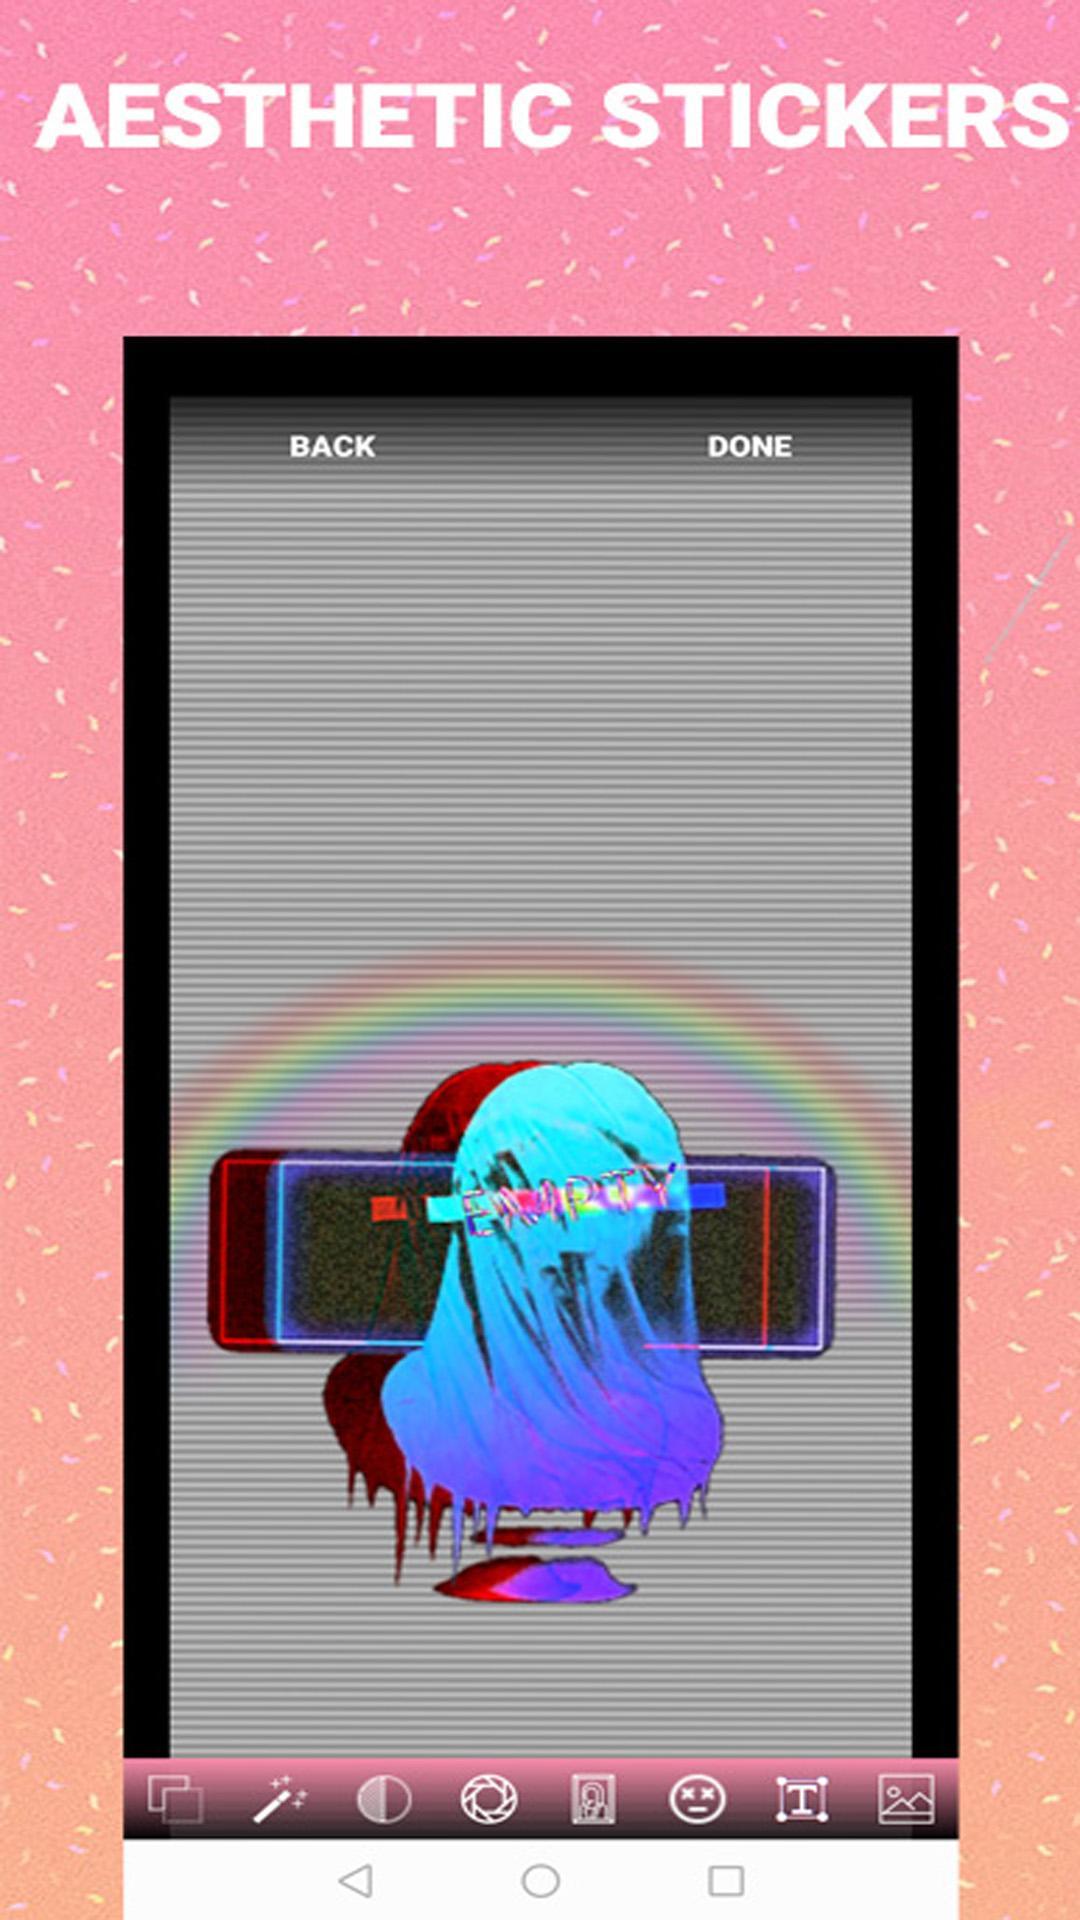 Trippy Cute : Aesthetic Glitch Effect Trippy Aesthetic Checkered Wallpaper